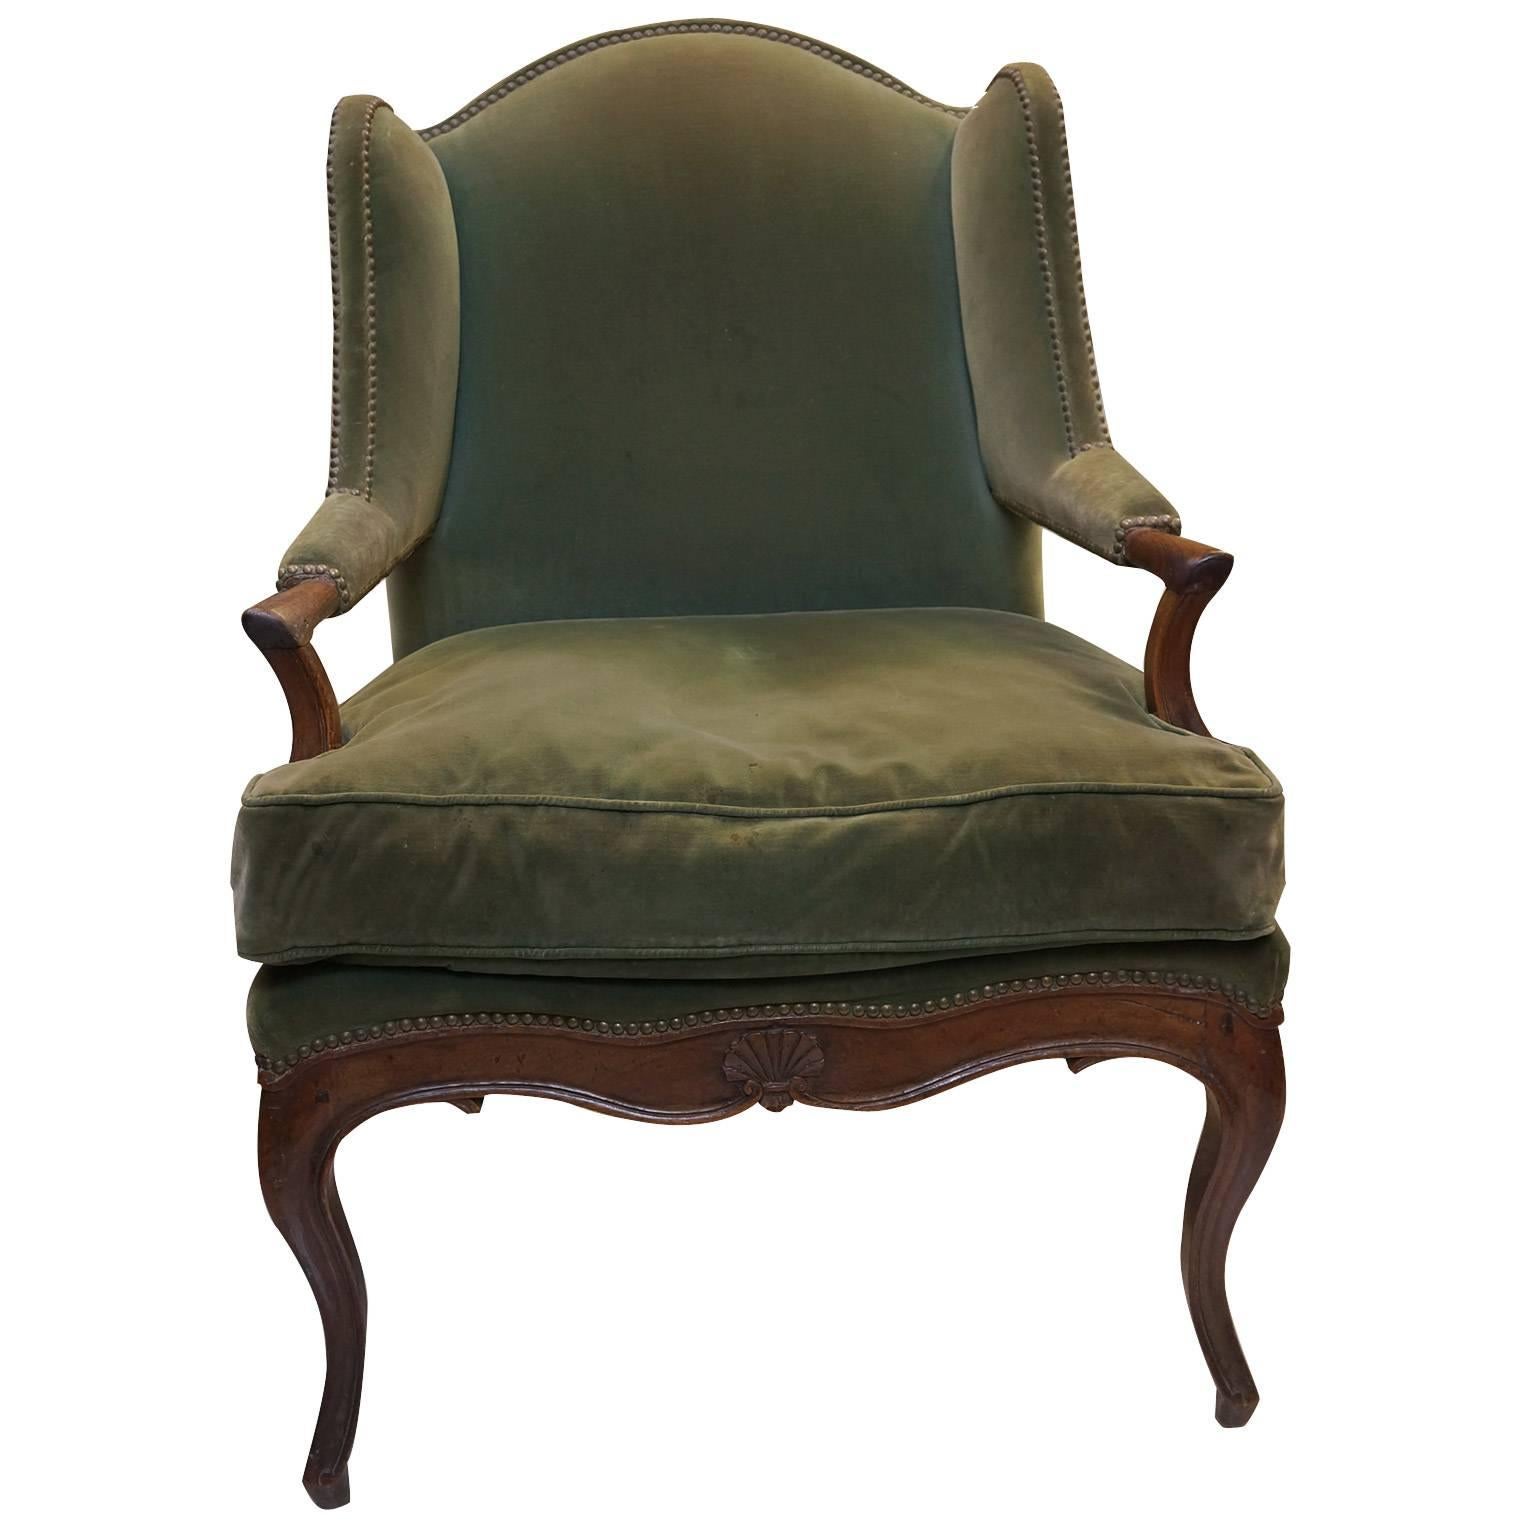 This 18th Century French, walnut chair is nicely carved with a fine patina. A loose down filled cushion and French nail heads are used for the upholstery. Because of the large size, this chair is very comfortable. The walnut frame is in excellent